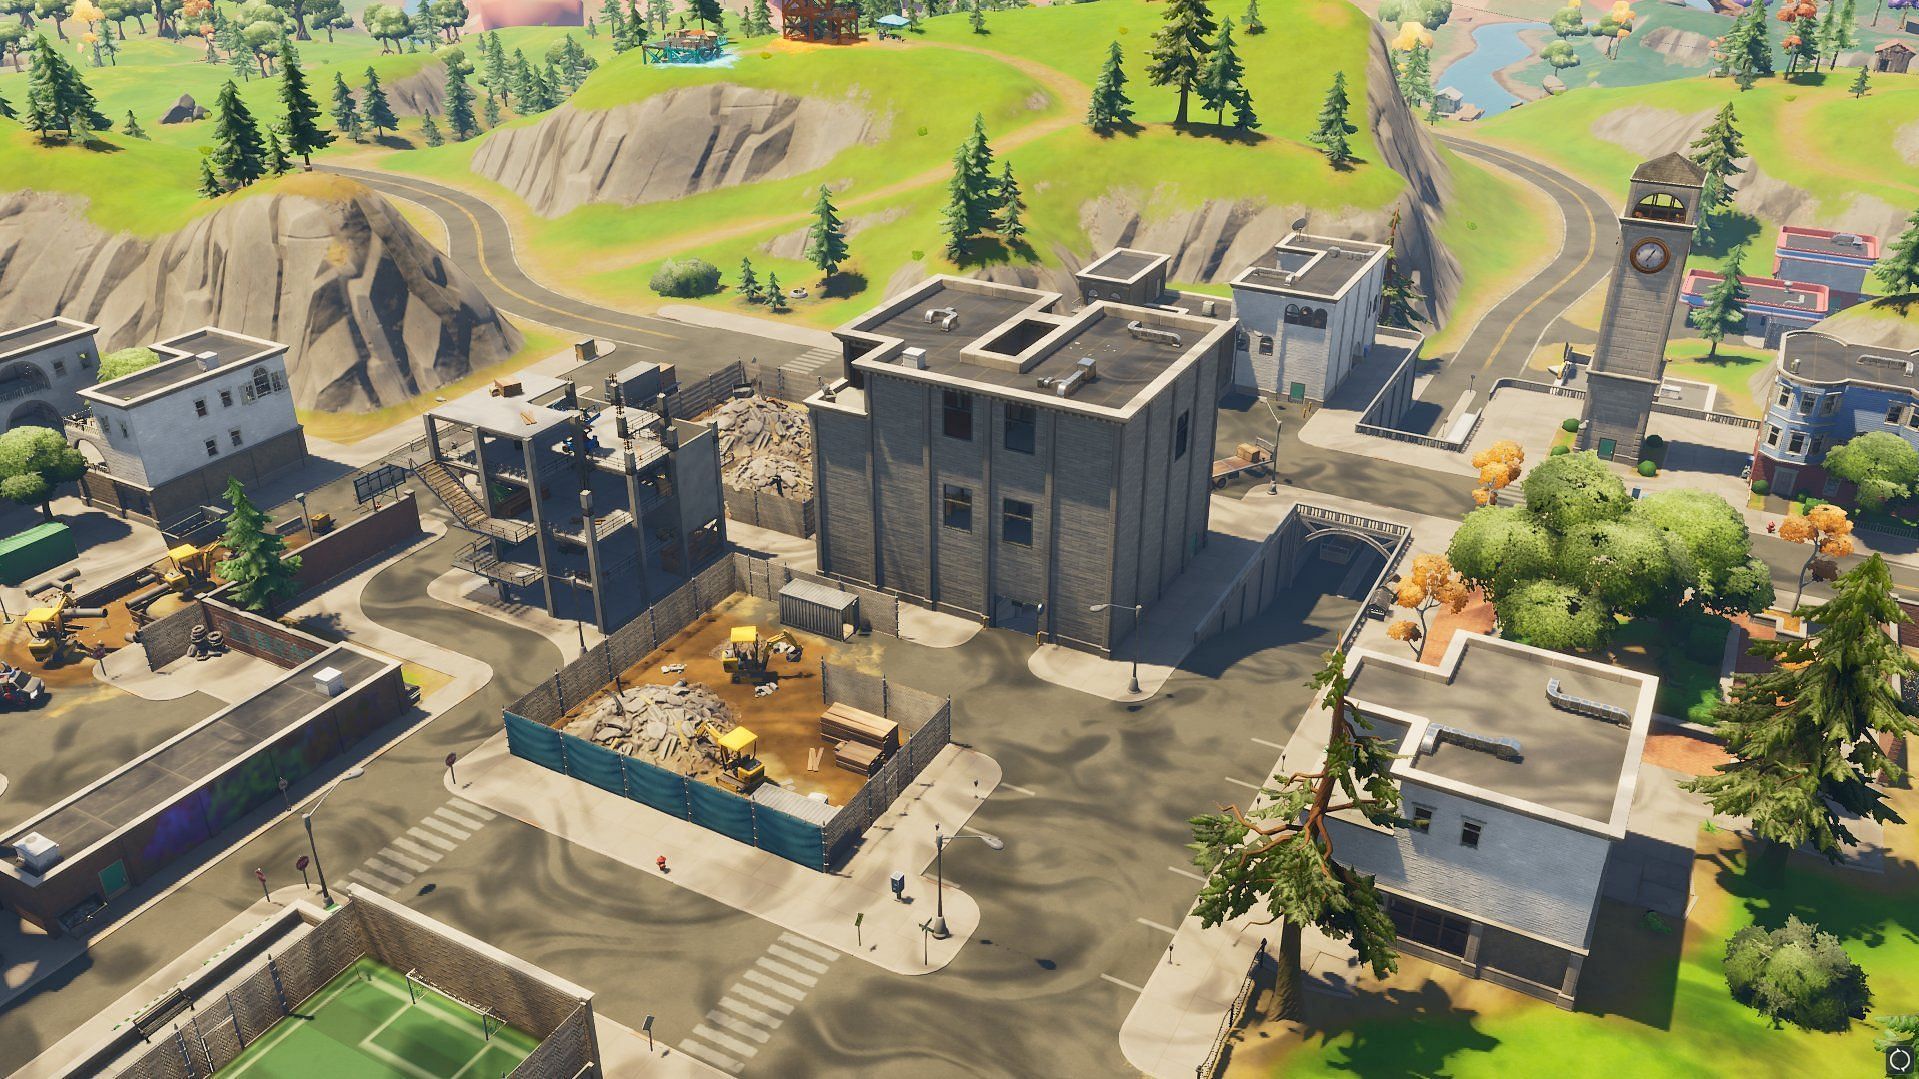 Tilted Towers is about to become super-sweaty in Fortnite Chapter 3 Season 3 (Image via Twitter/zatheo_)